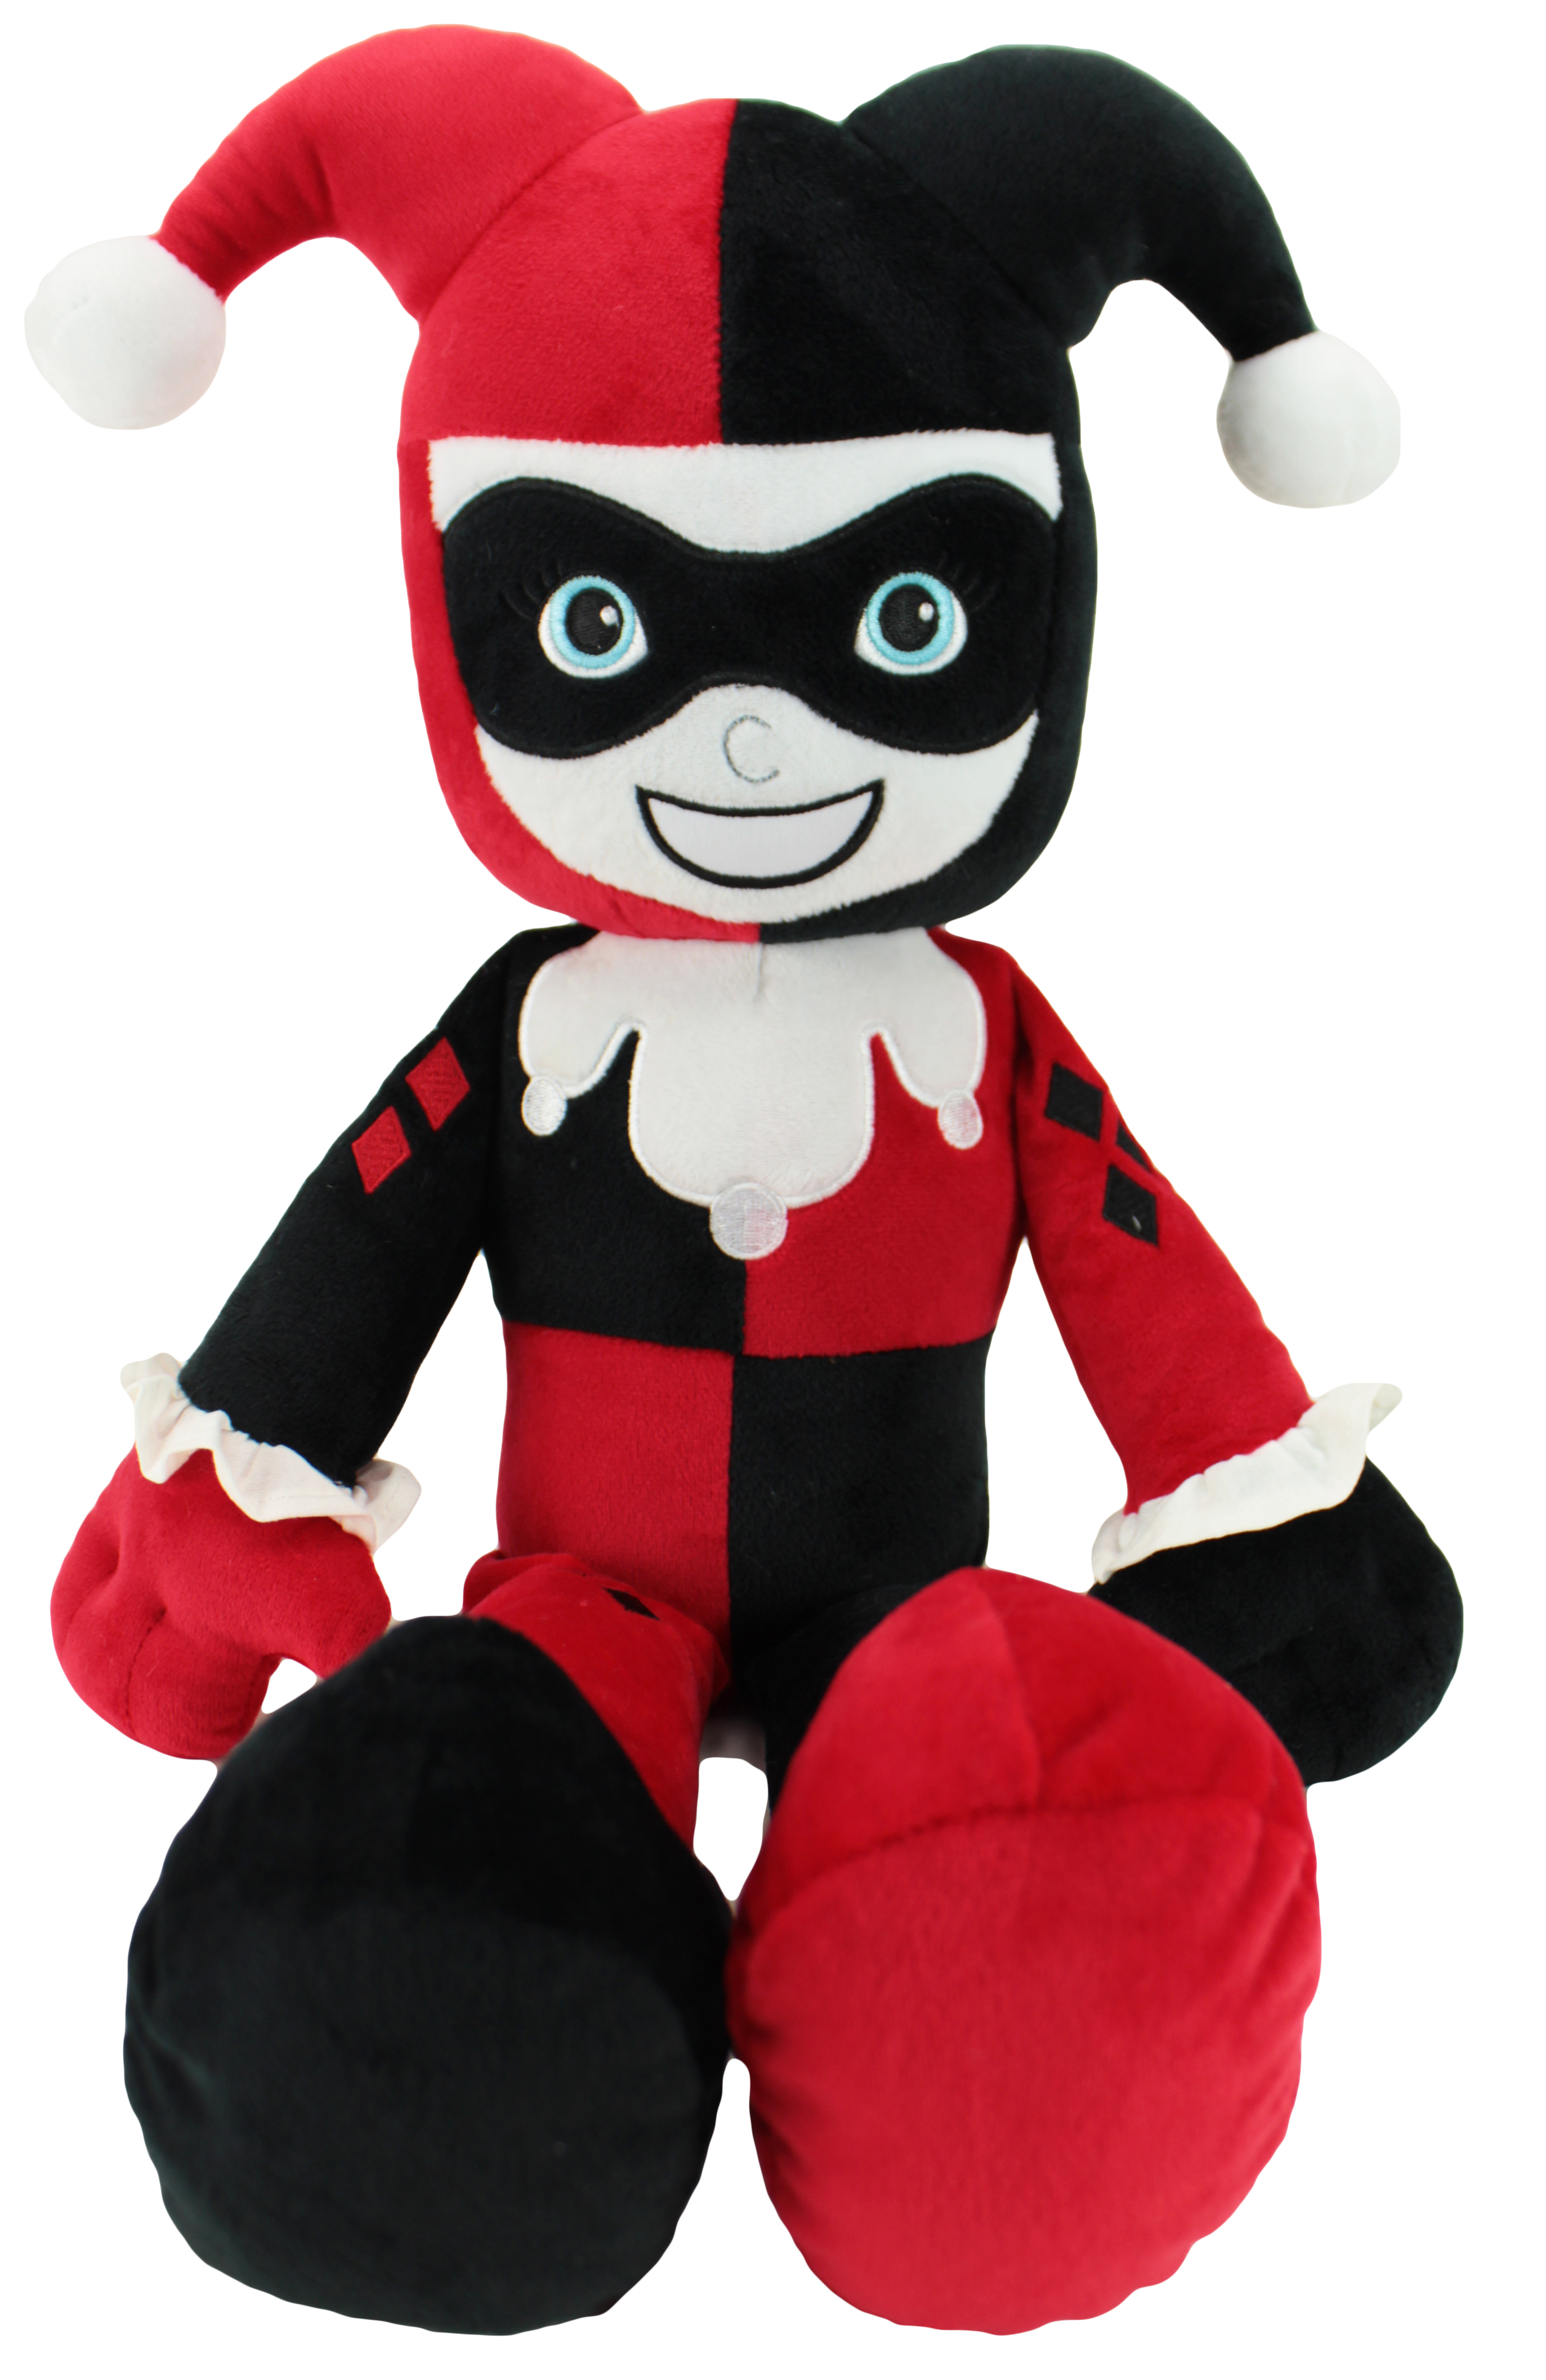 Justice League Harley Quinn Plush Character - image 1 of 4